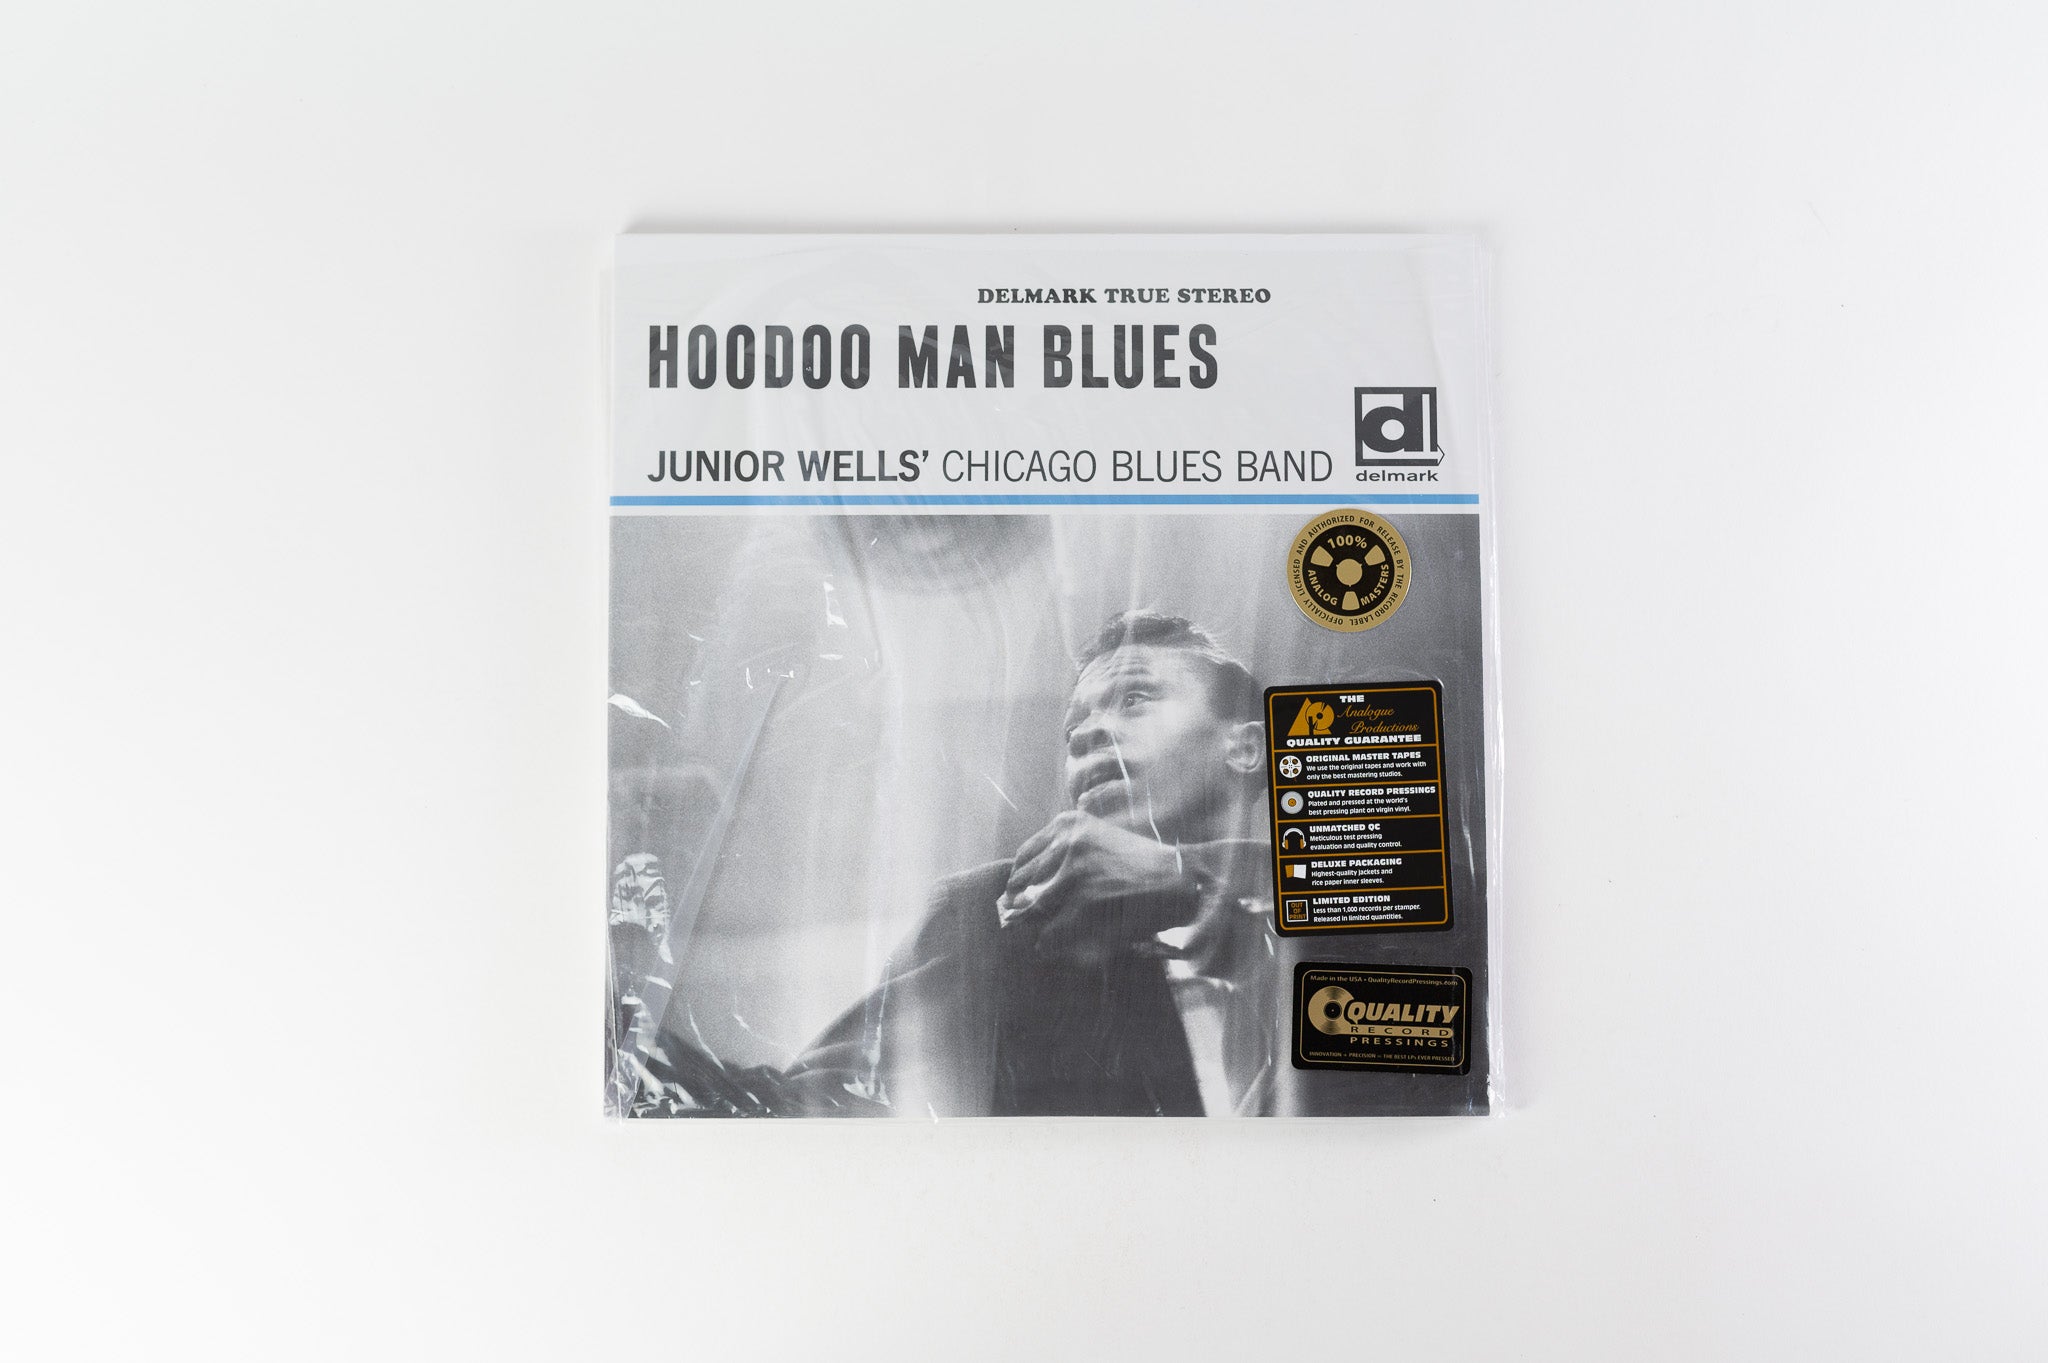 Junior Wells' Chicago Blues Band - Hoodoo Man Blues Reissue 45 RPM on Analogue Productions